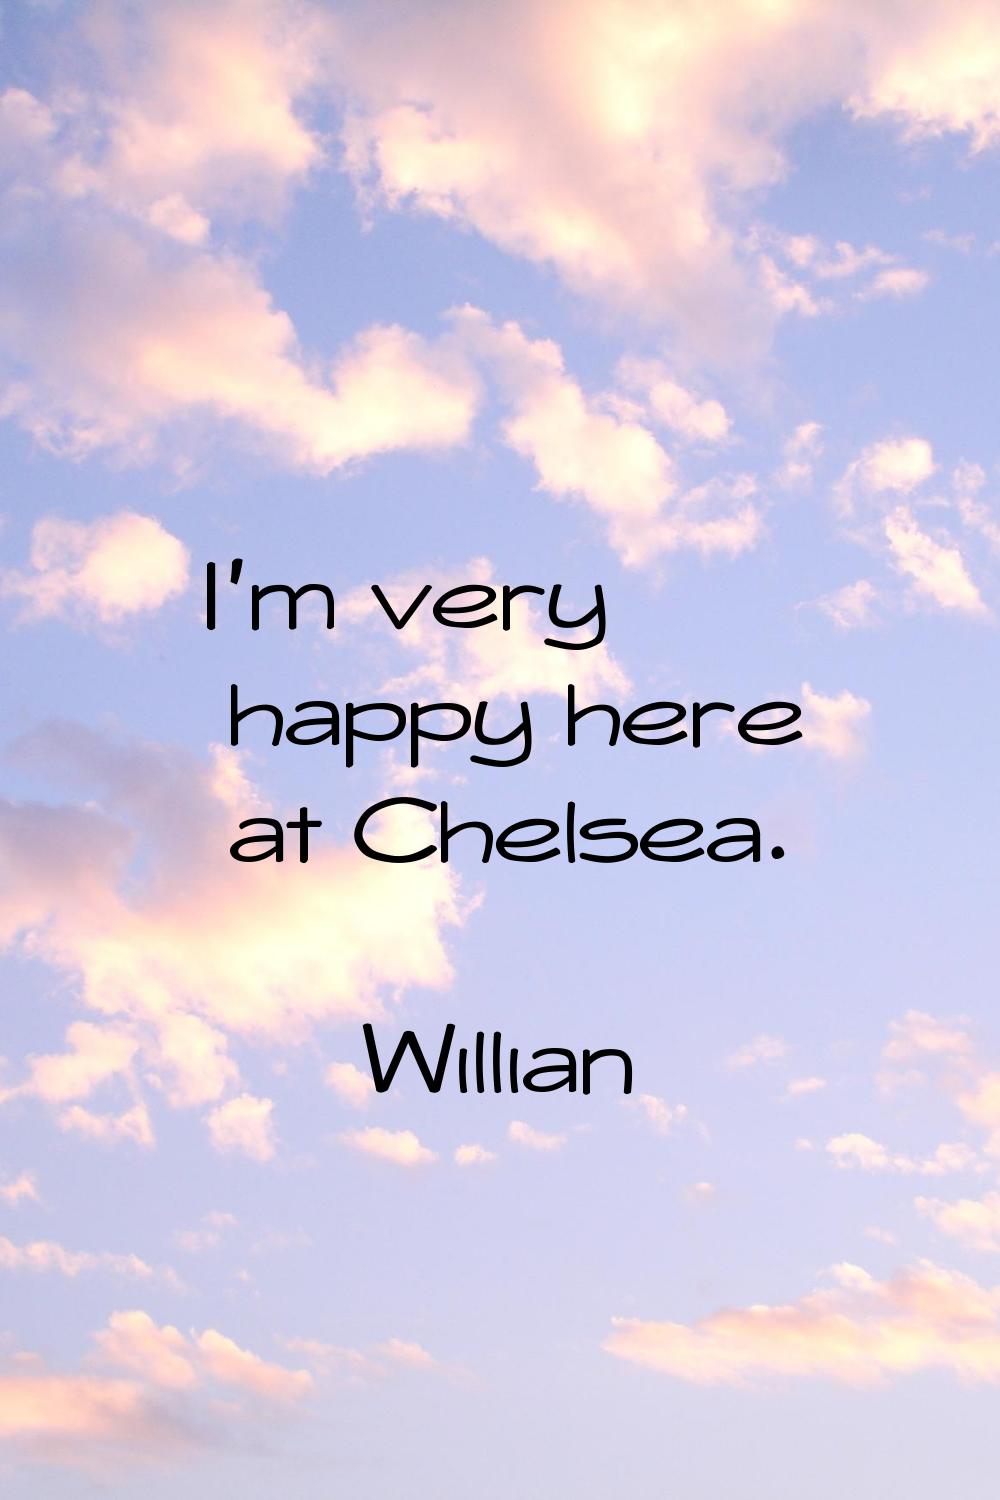 I'm very happy here at Chelsea.